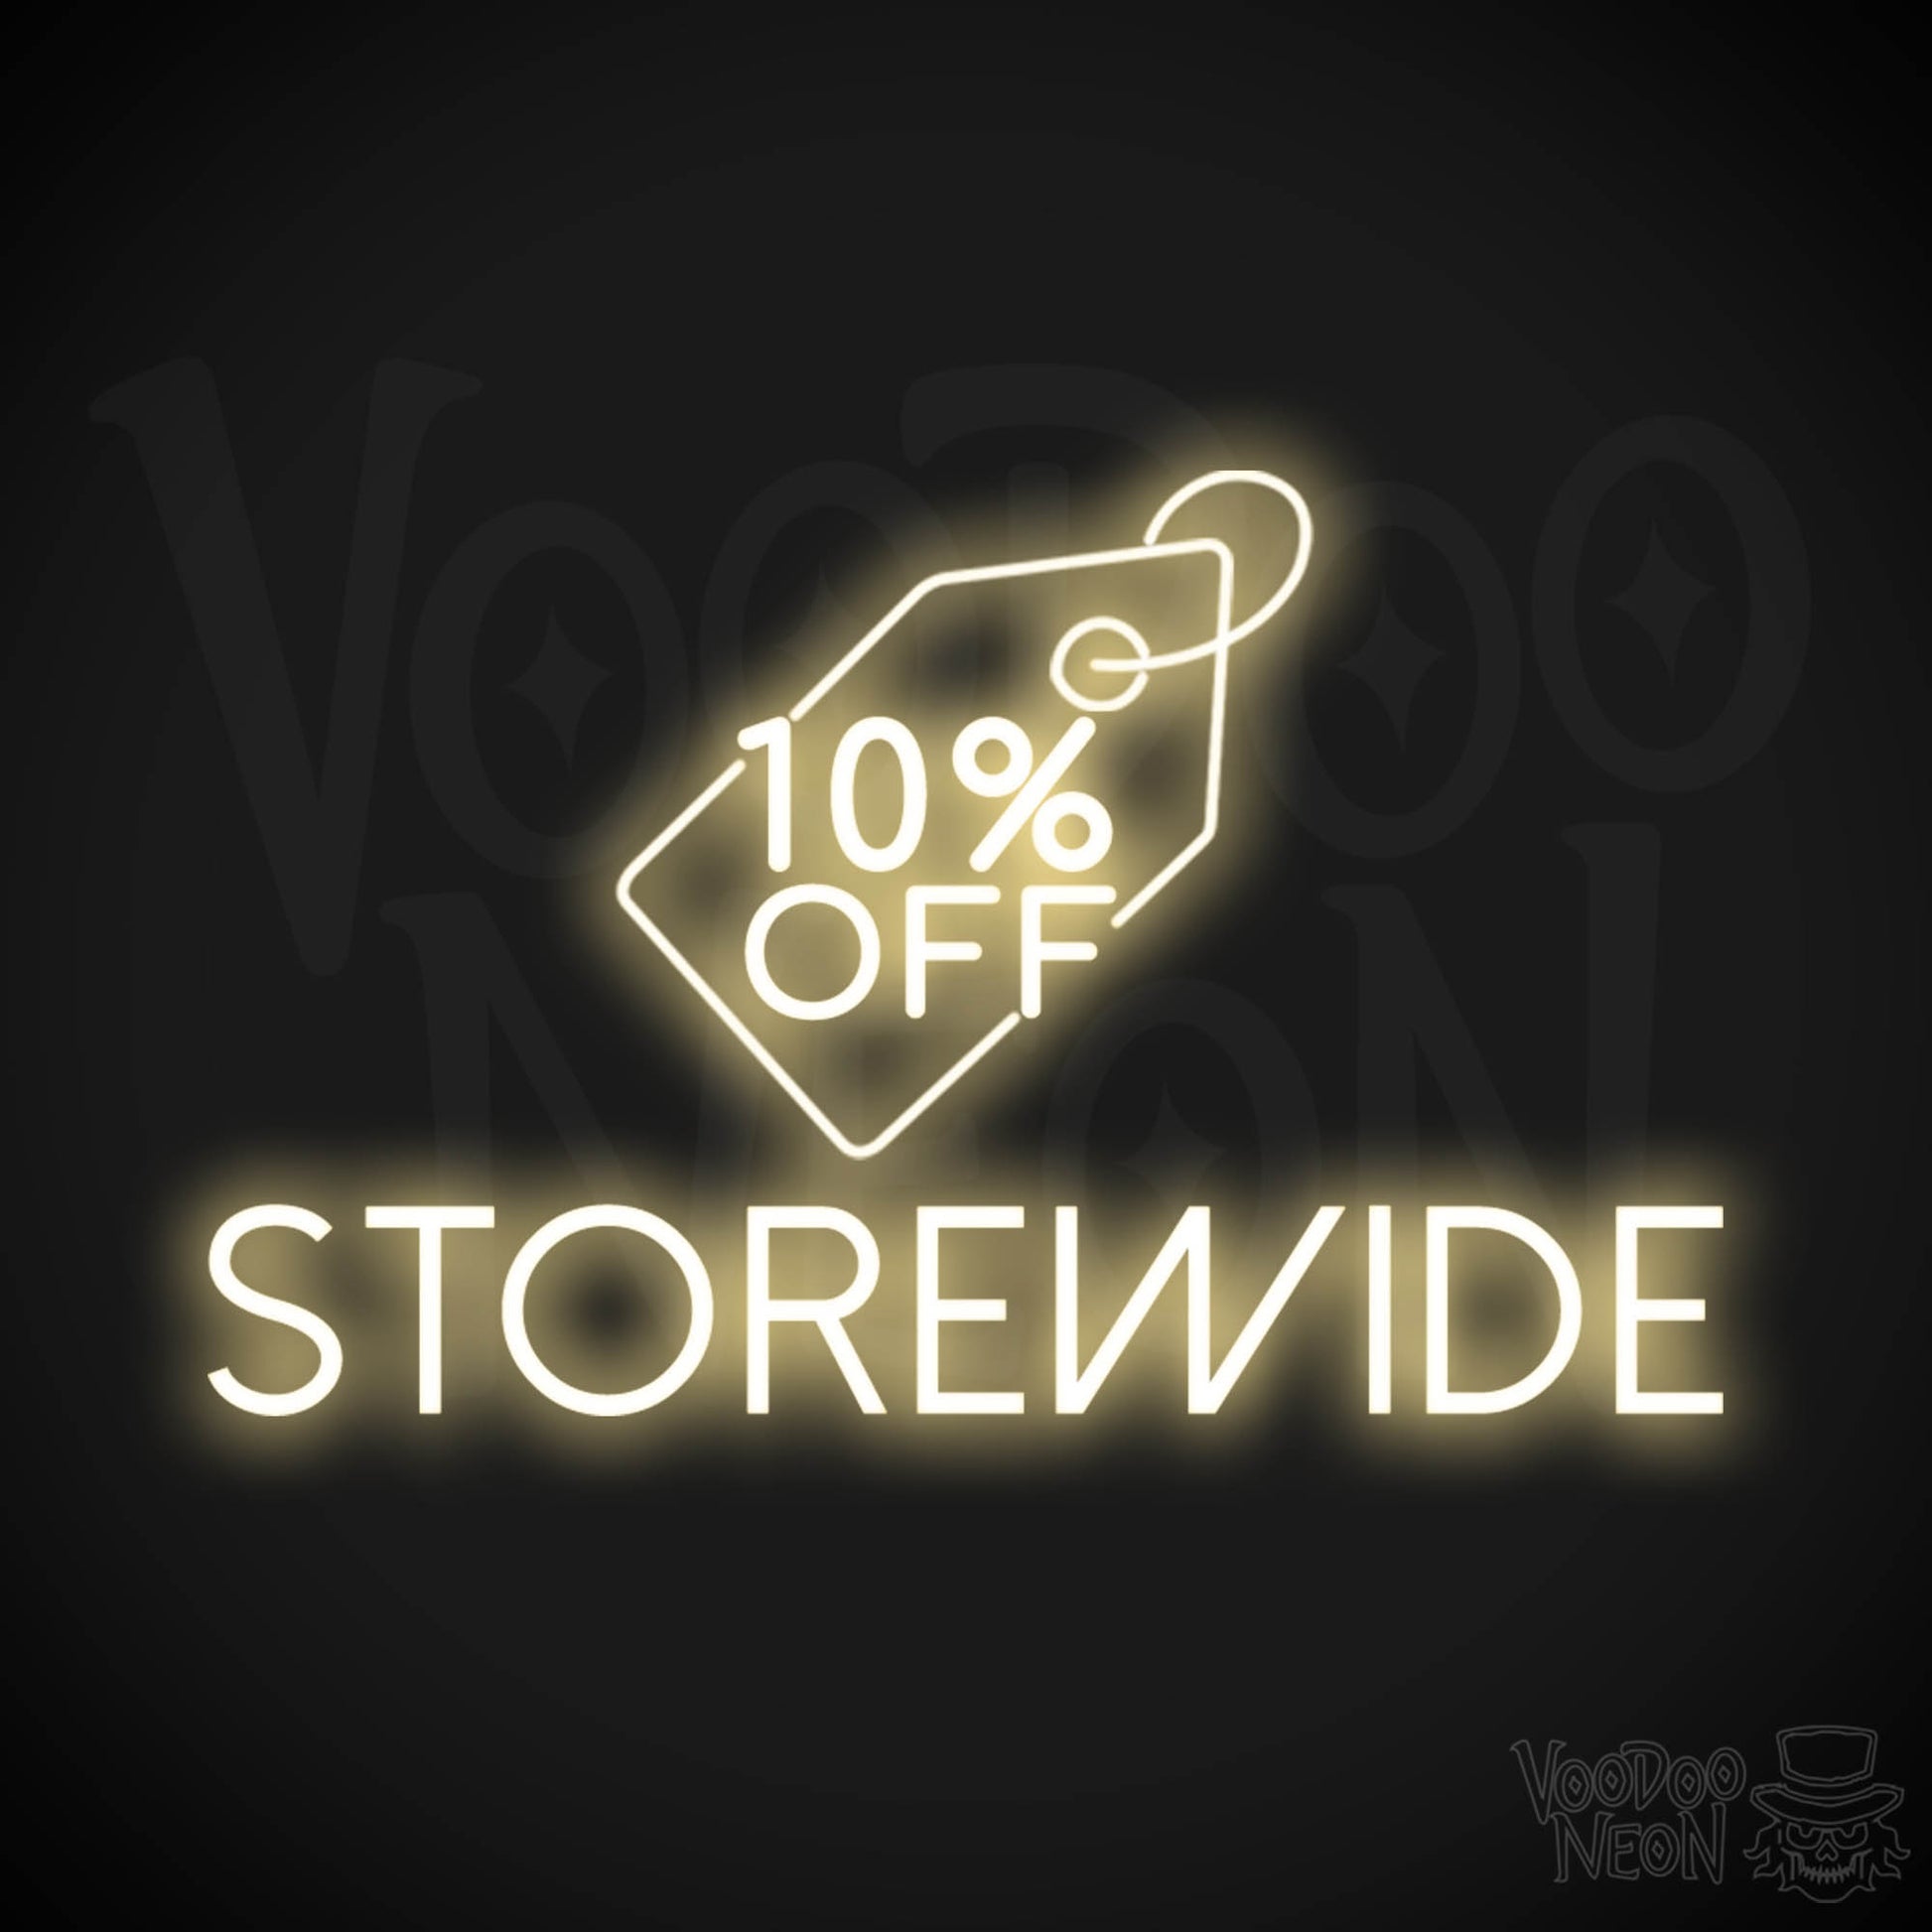 10% Off Storewide Neon Sign - 10% Off Storewide Sign - Neon Shop Signs - Color Warm White